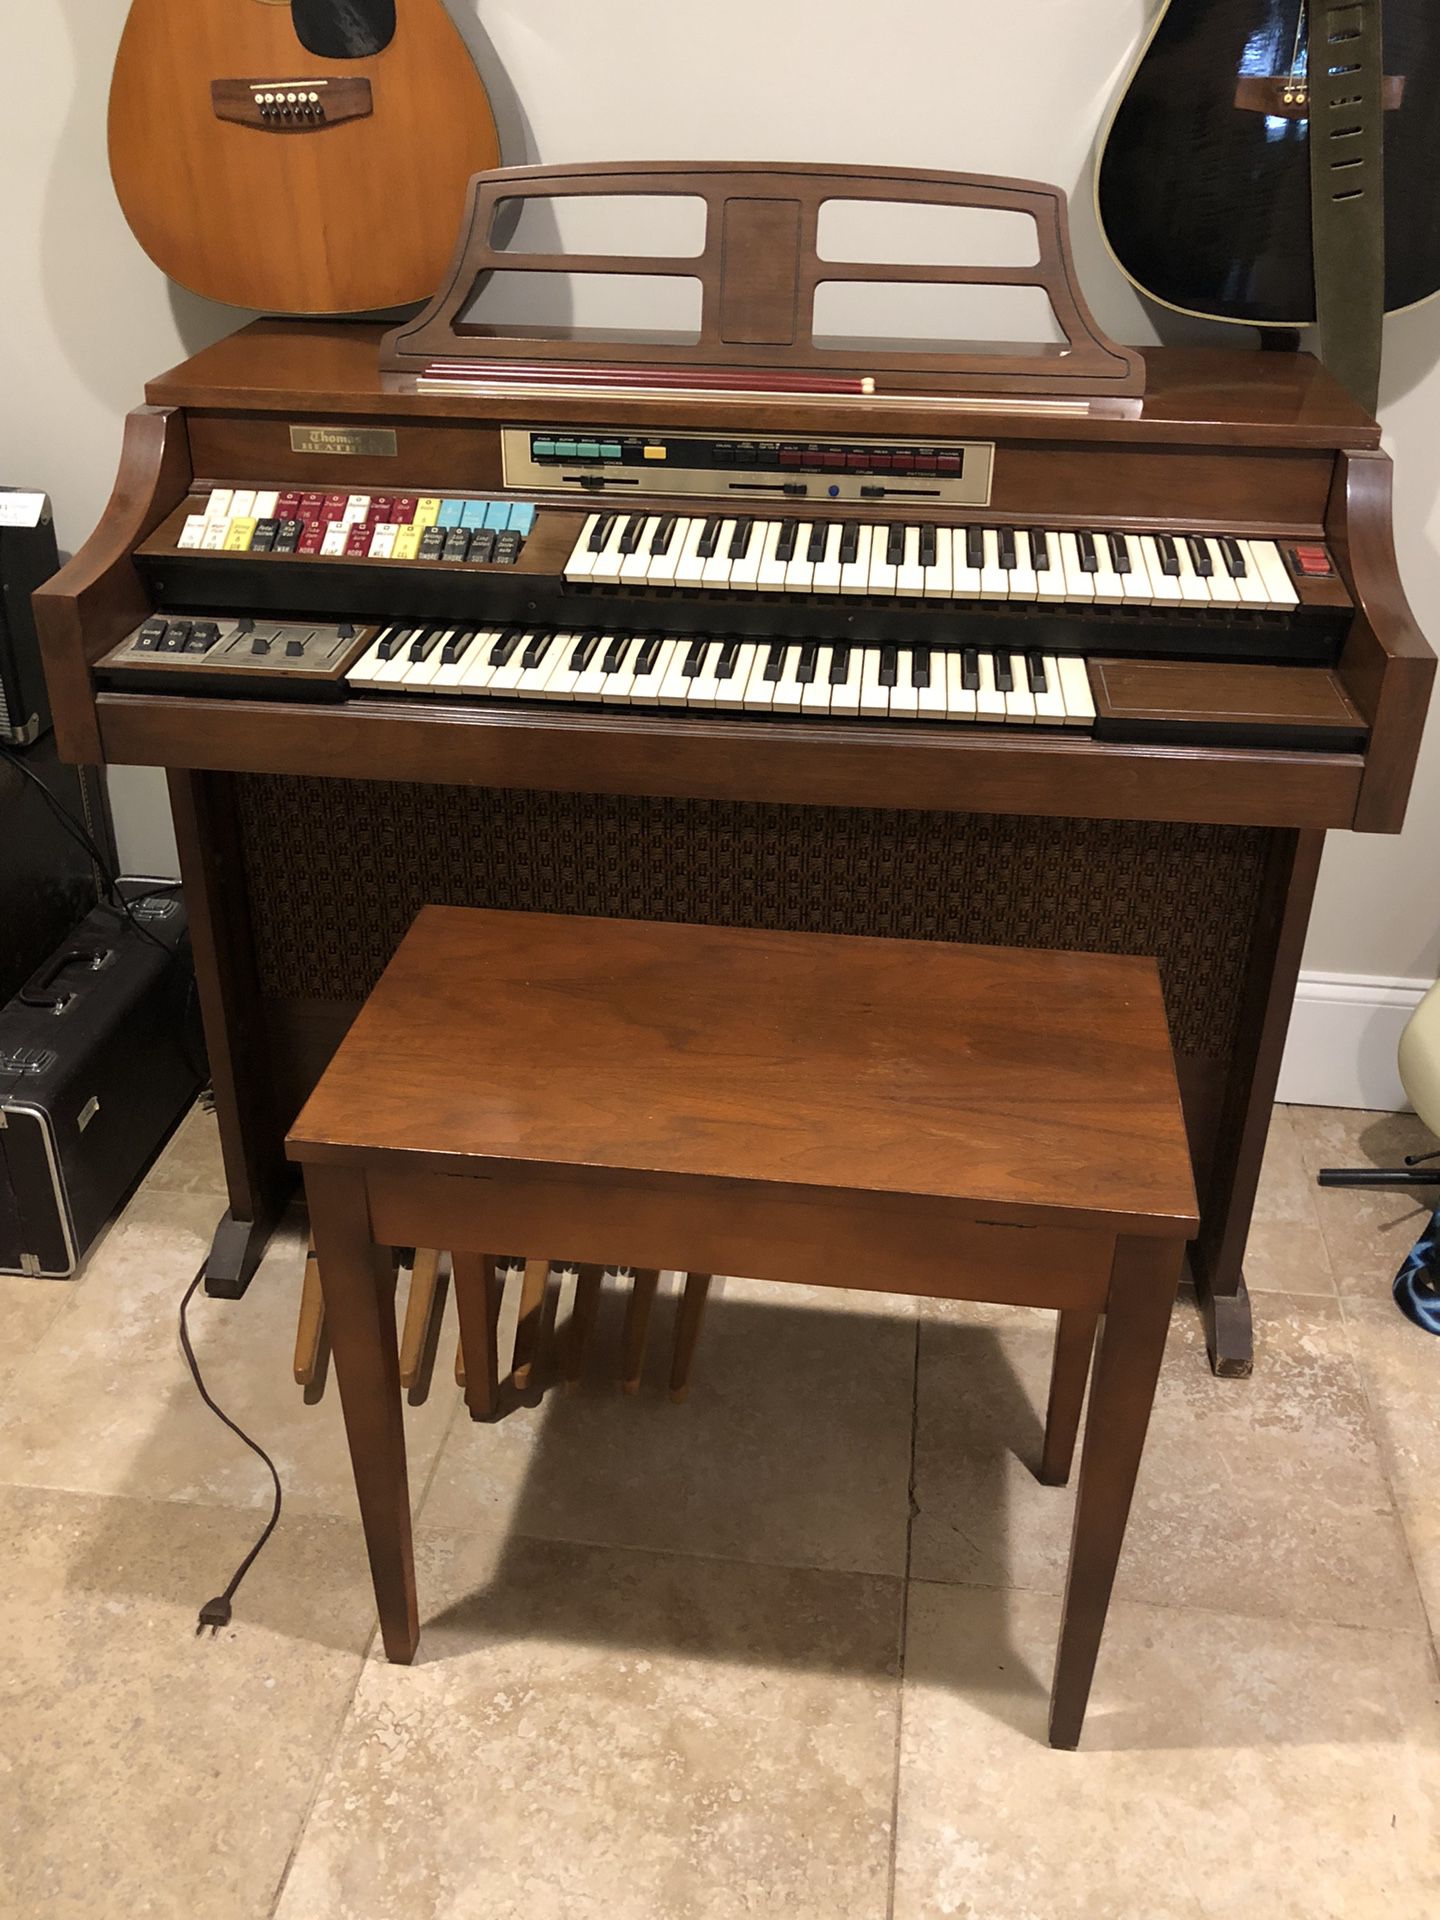 Organ - Thomas by Heathkit Vintage 1960s. Free If You Come Pick It Up.